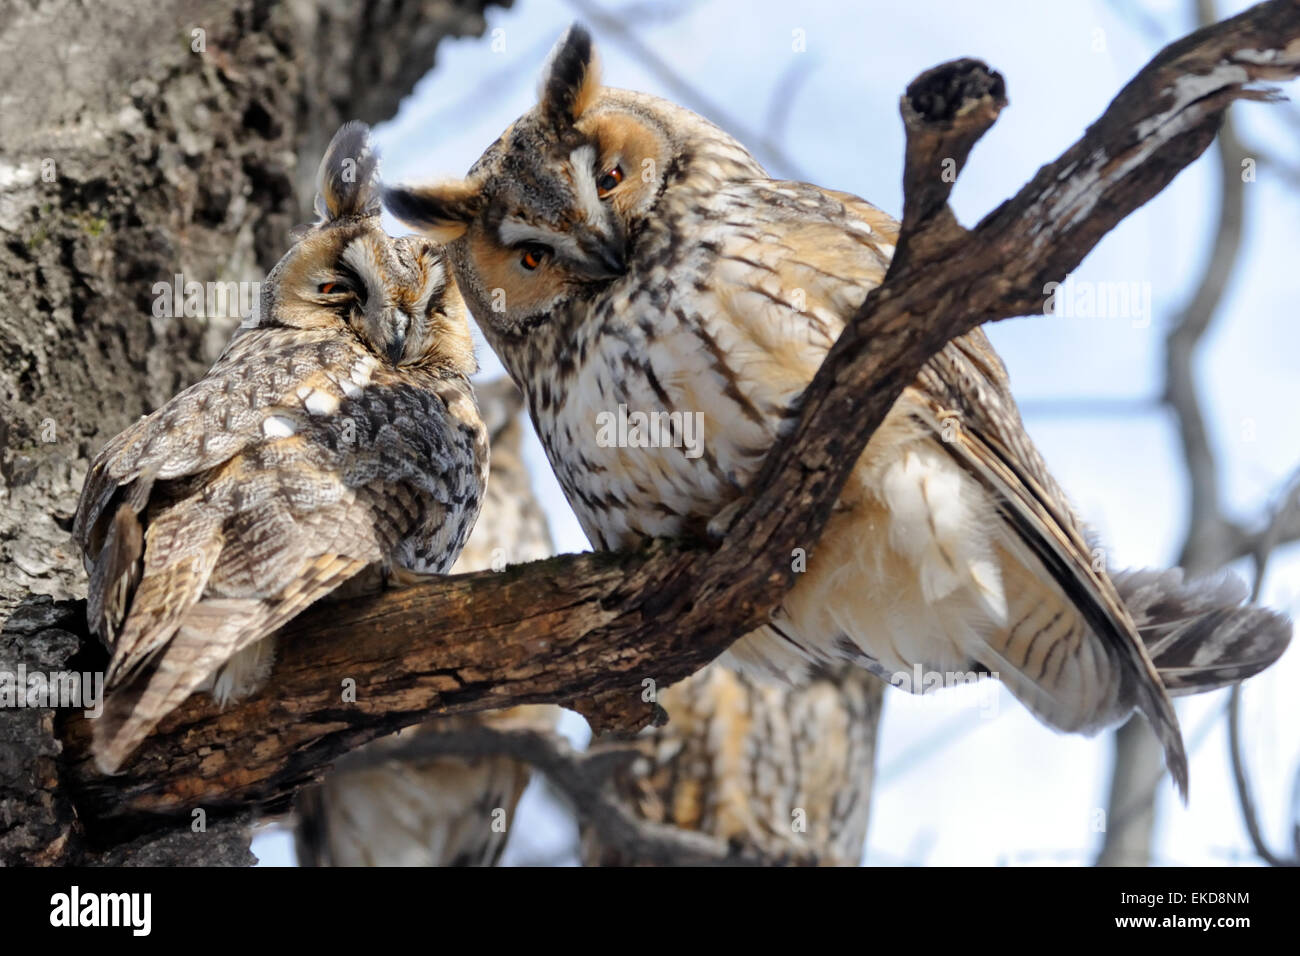 Four Long-eared Owsl at the tree Stock Photo